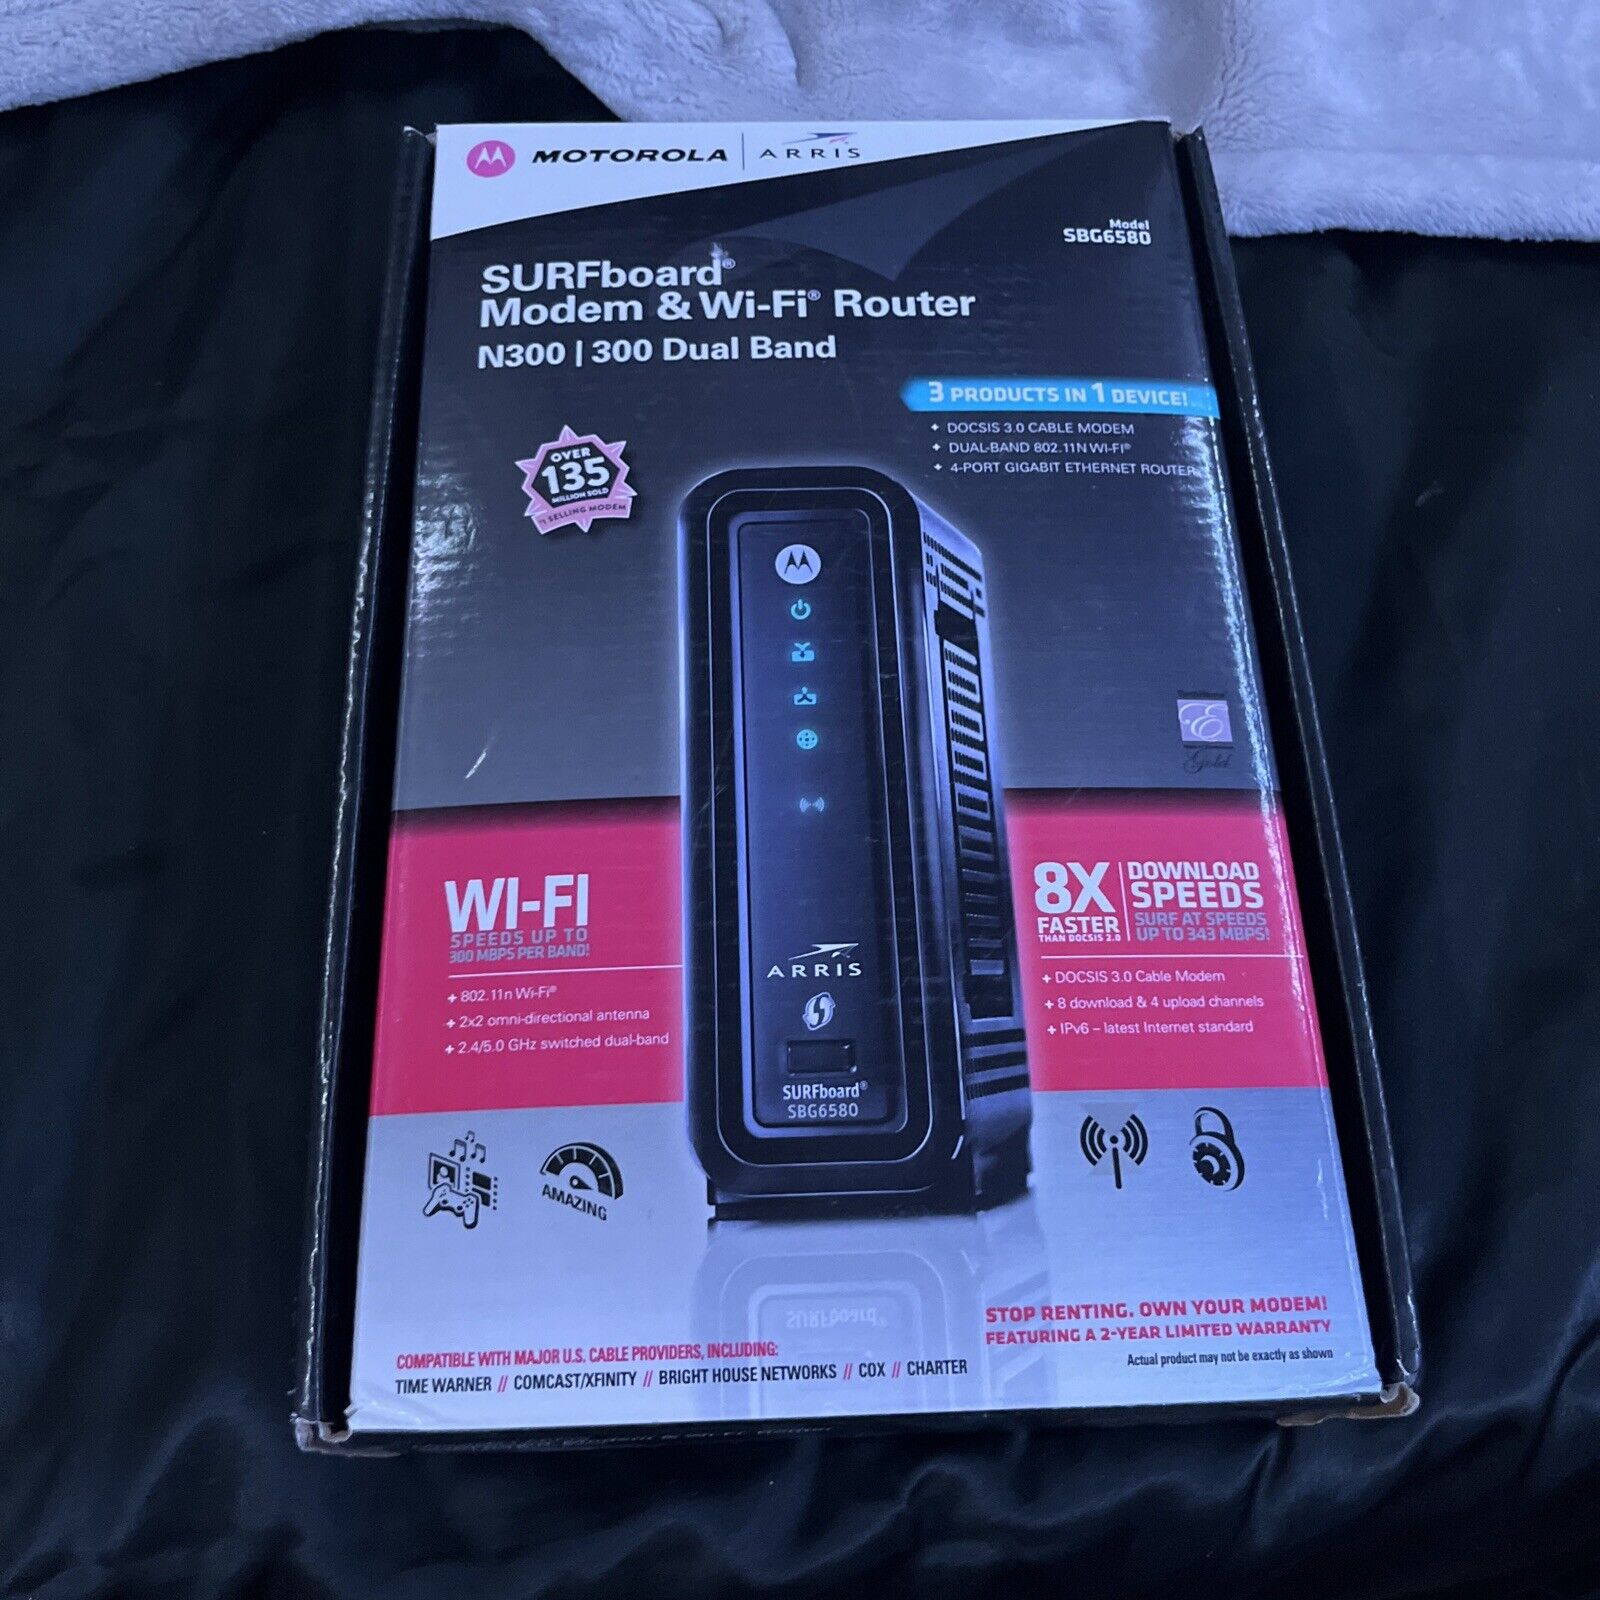 ARRIS Surfboard SBG-6580 N300/300 WI-FI ROUTER ONLY ( NO POWER CABLE)